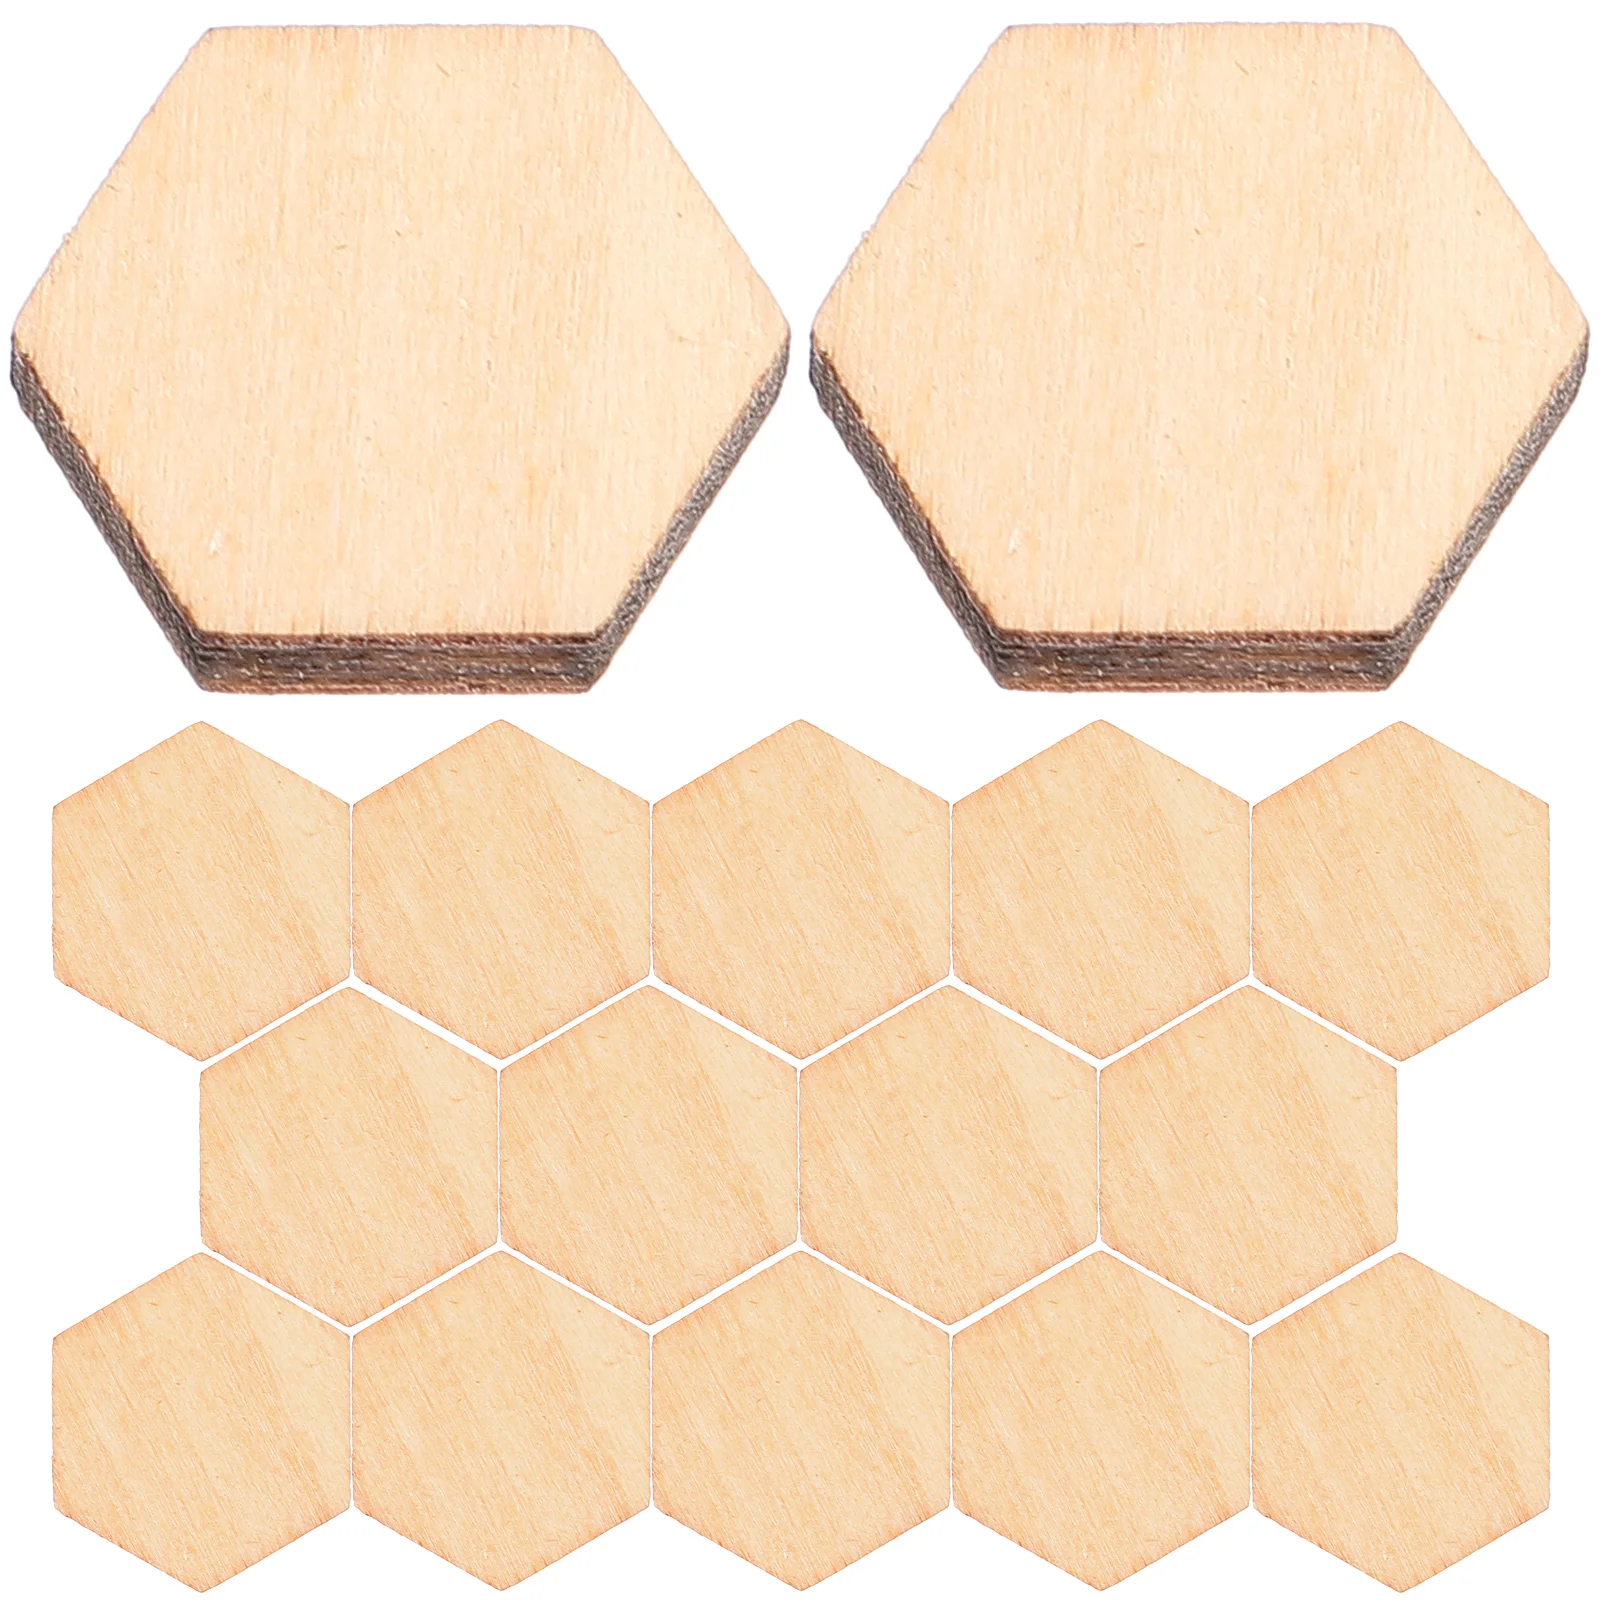 

200pcs Wood Discs Slices Hexagonal Shape Unfinished Wooden Cutouts for DIY Craft Project Blank Name Tags Gift Tags for Hoops